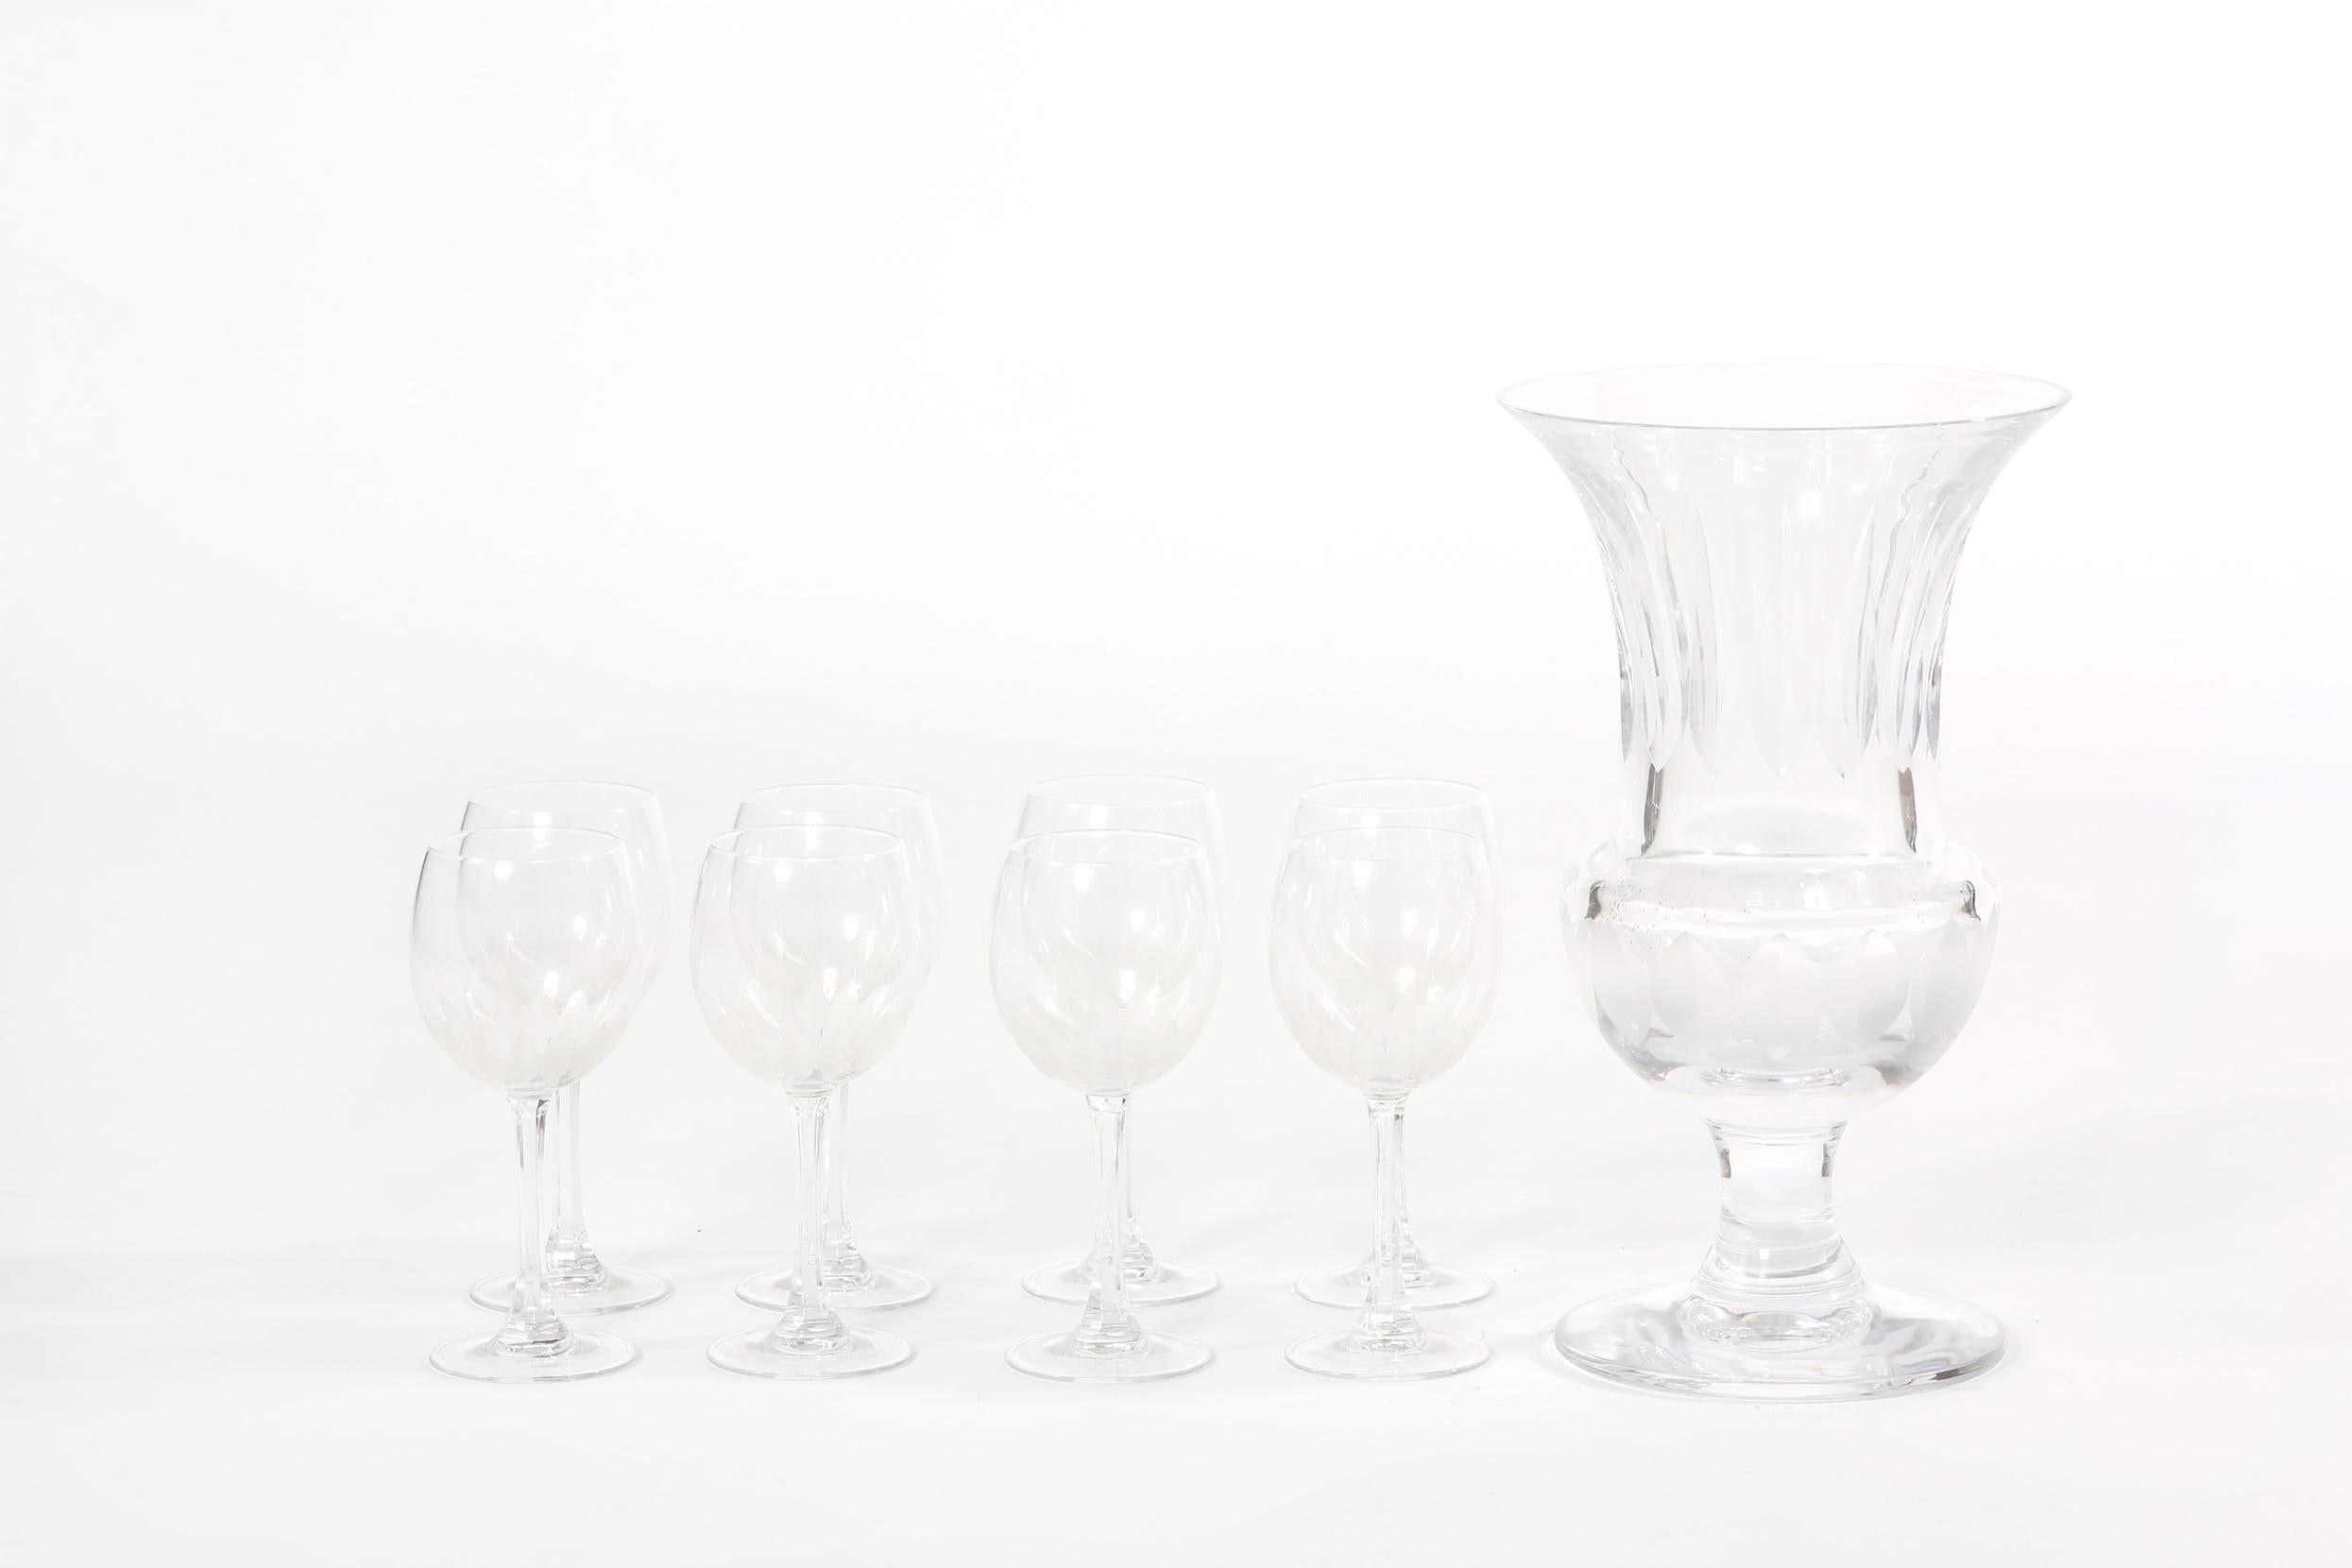 Mid-20th century Tiffany cut crystal wine or water service for 10 people with tall centerpiece vase. Each piece is in excellent condition. Maker's mark undersigned. The vase is about 14 inches high x 8 inches top diameter. Each glass is about 7.5